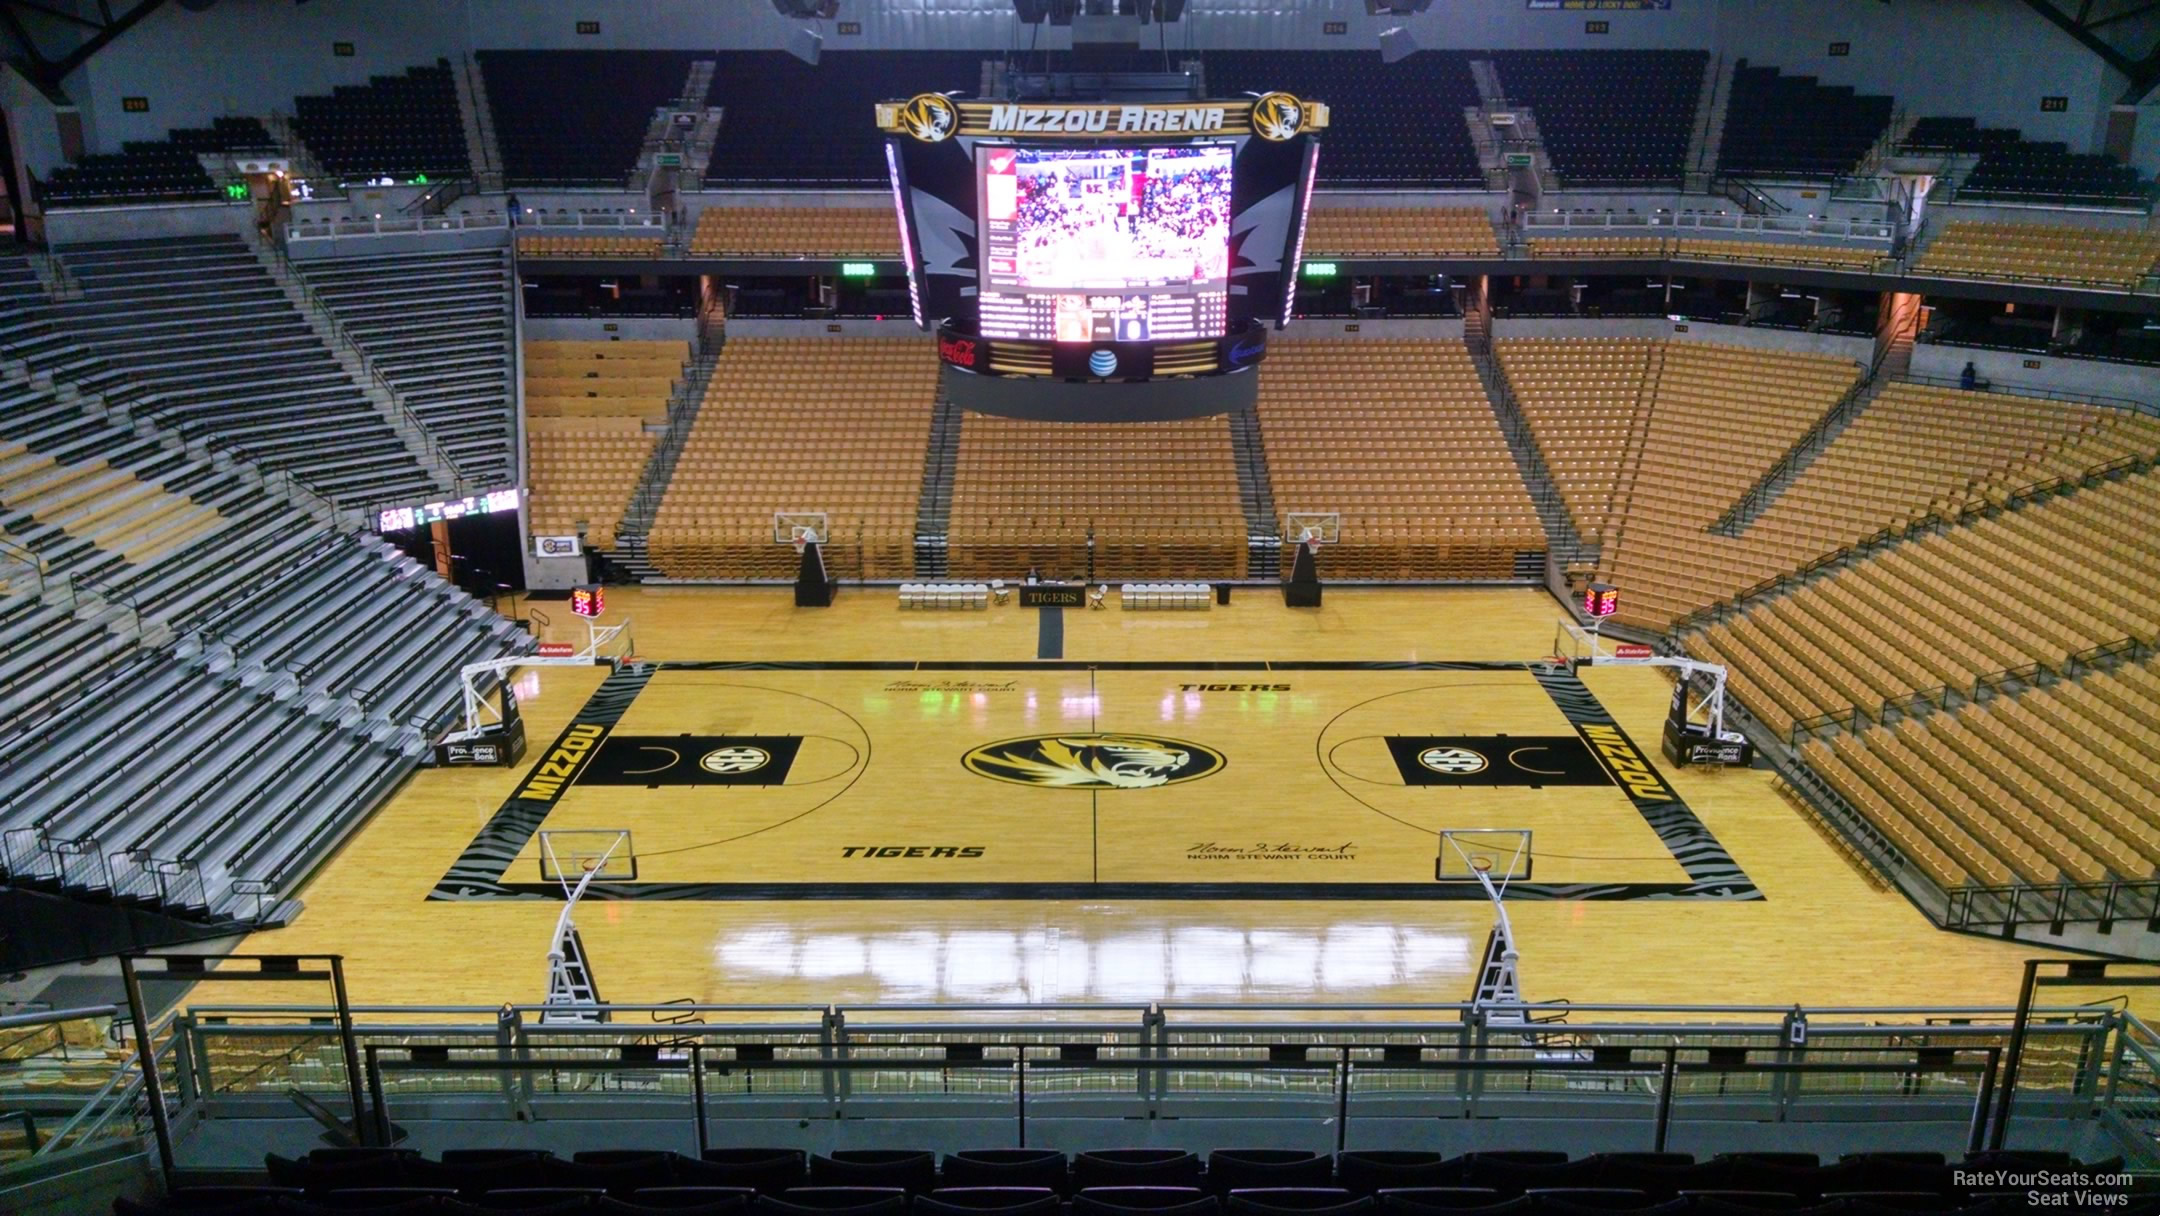 Mizzou Arena Seating Chart With Row Numbers